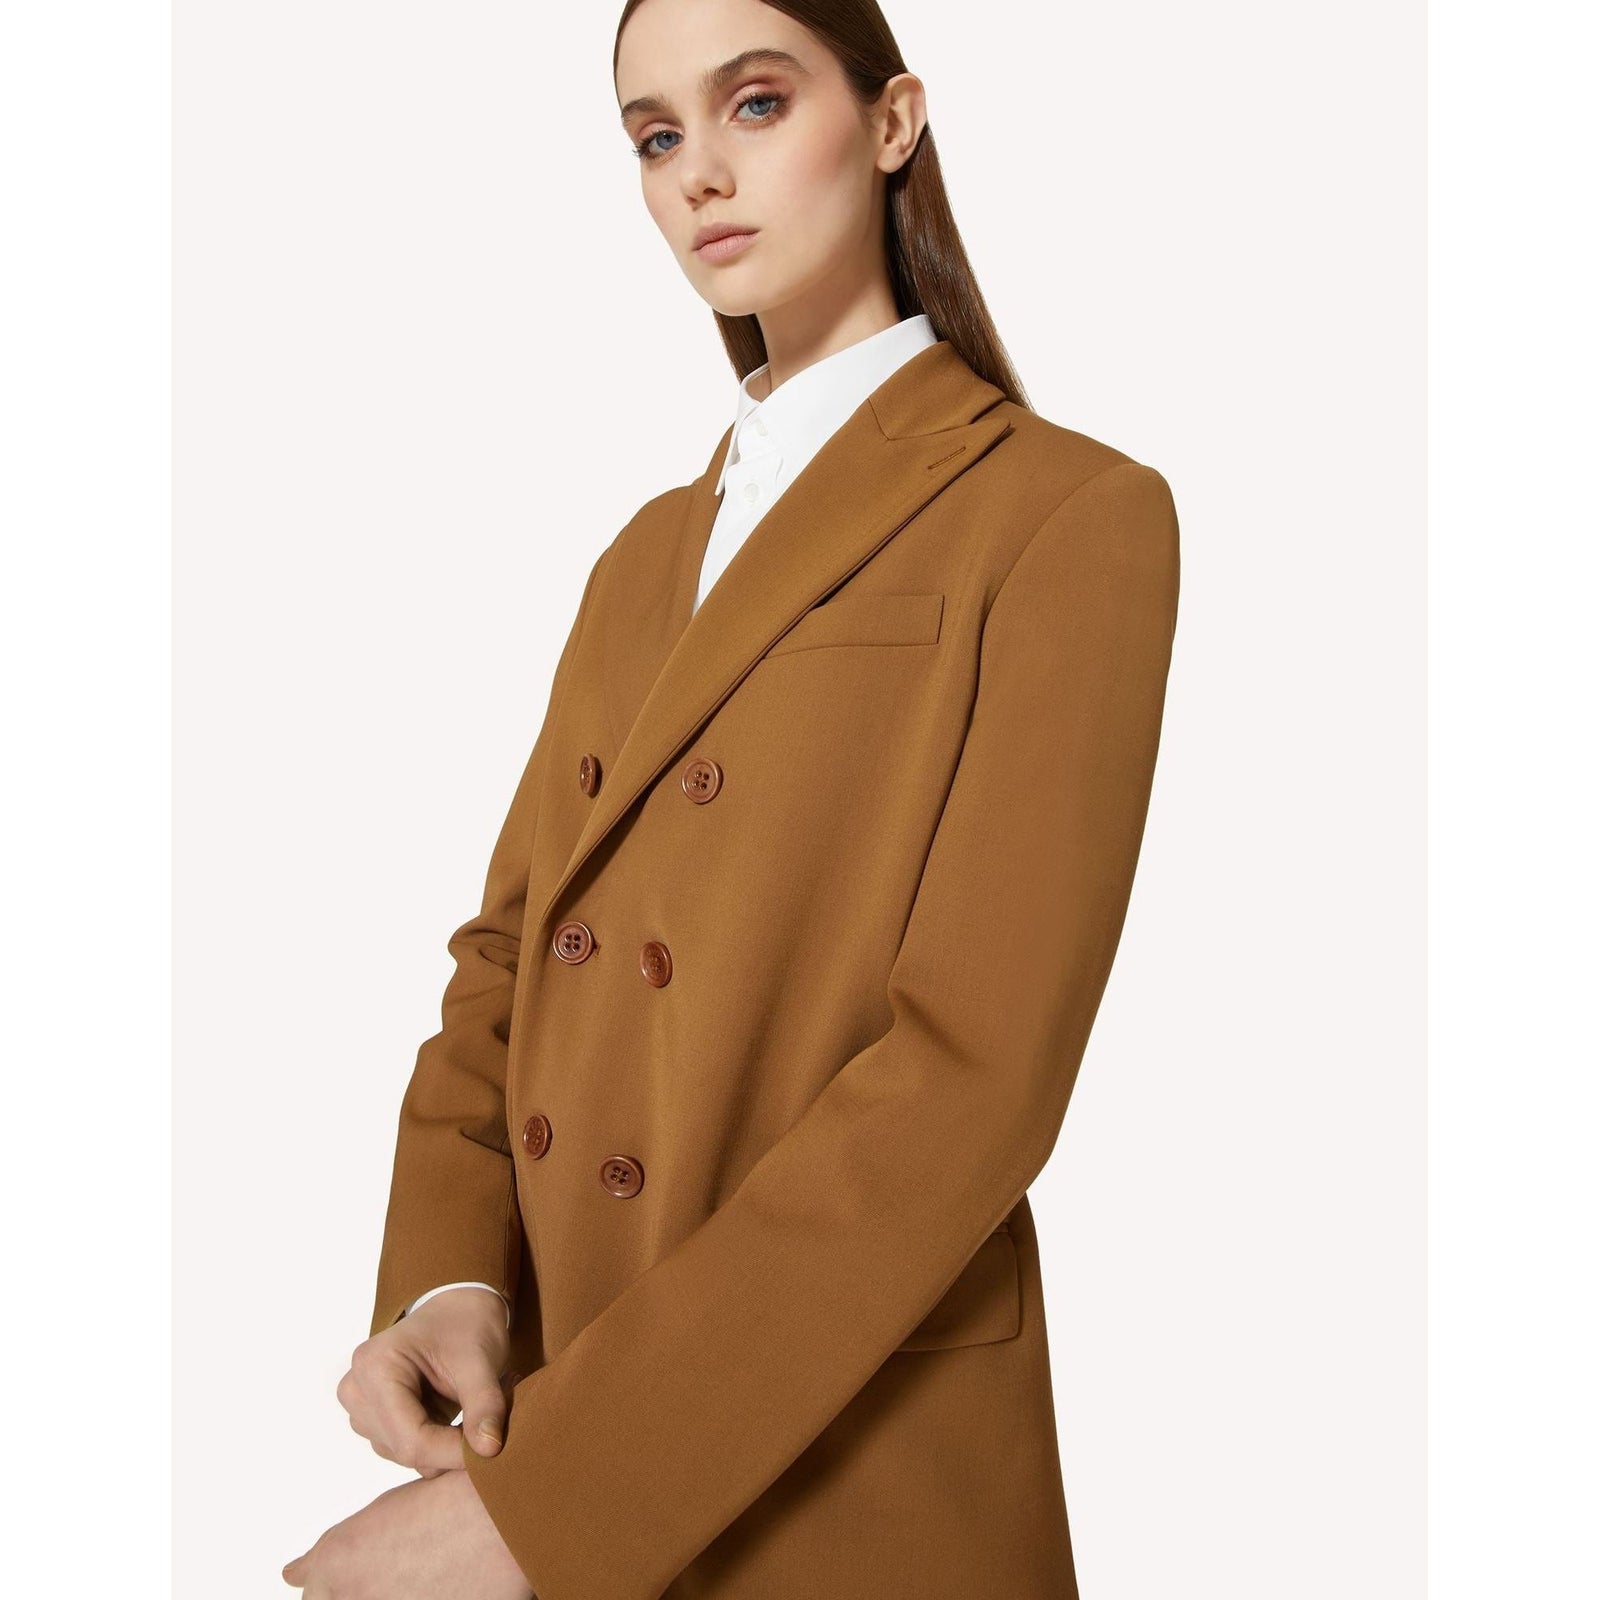 RED VALENTINO DOUBLE-BREASTED JACKET IN VISCOSE WOOL GABARDINE - Yooto